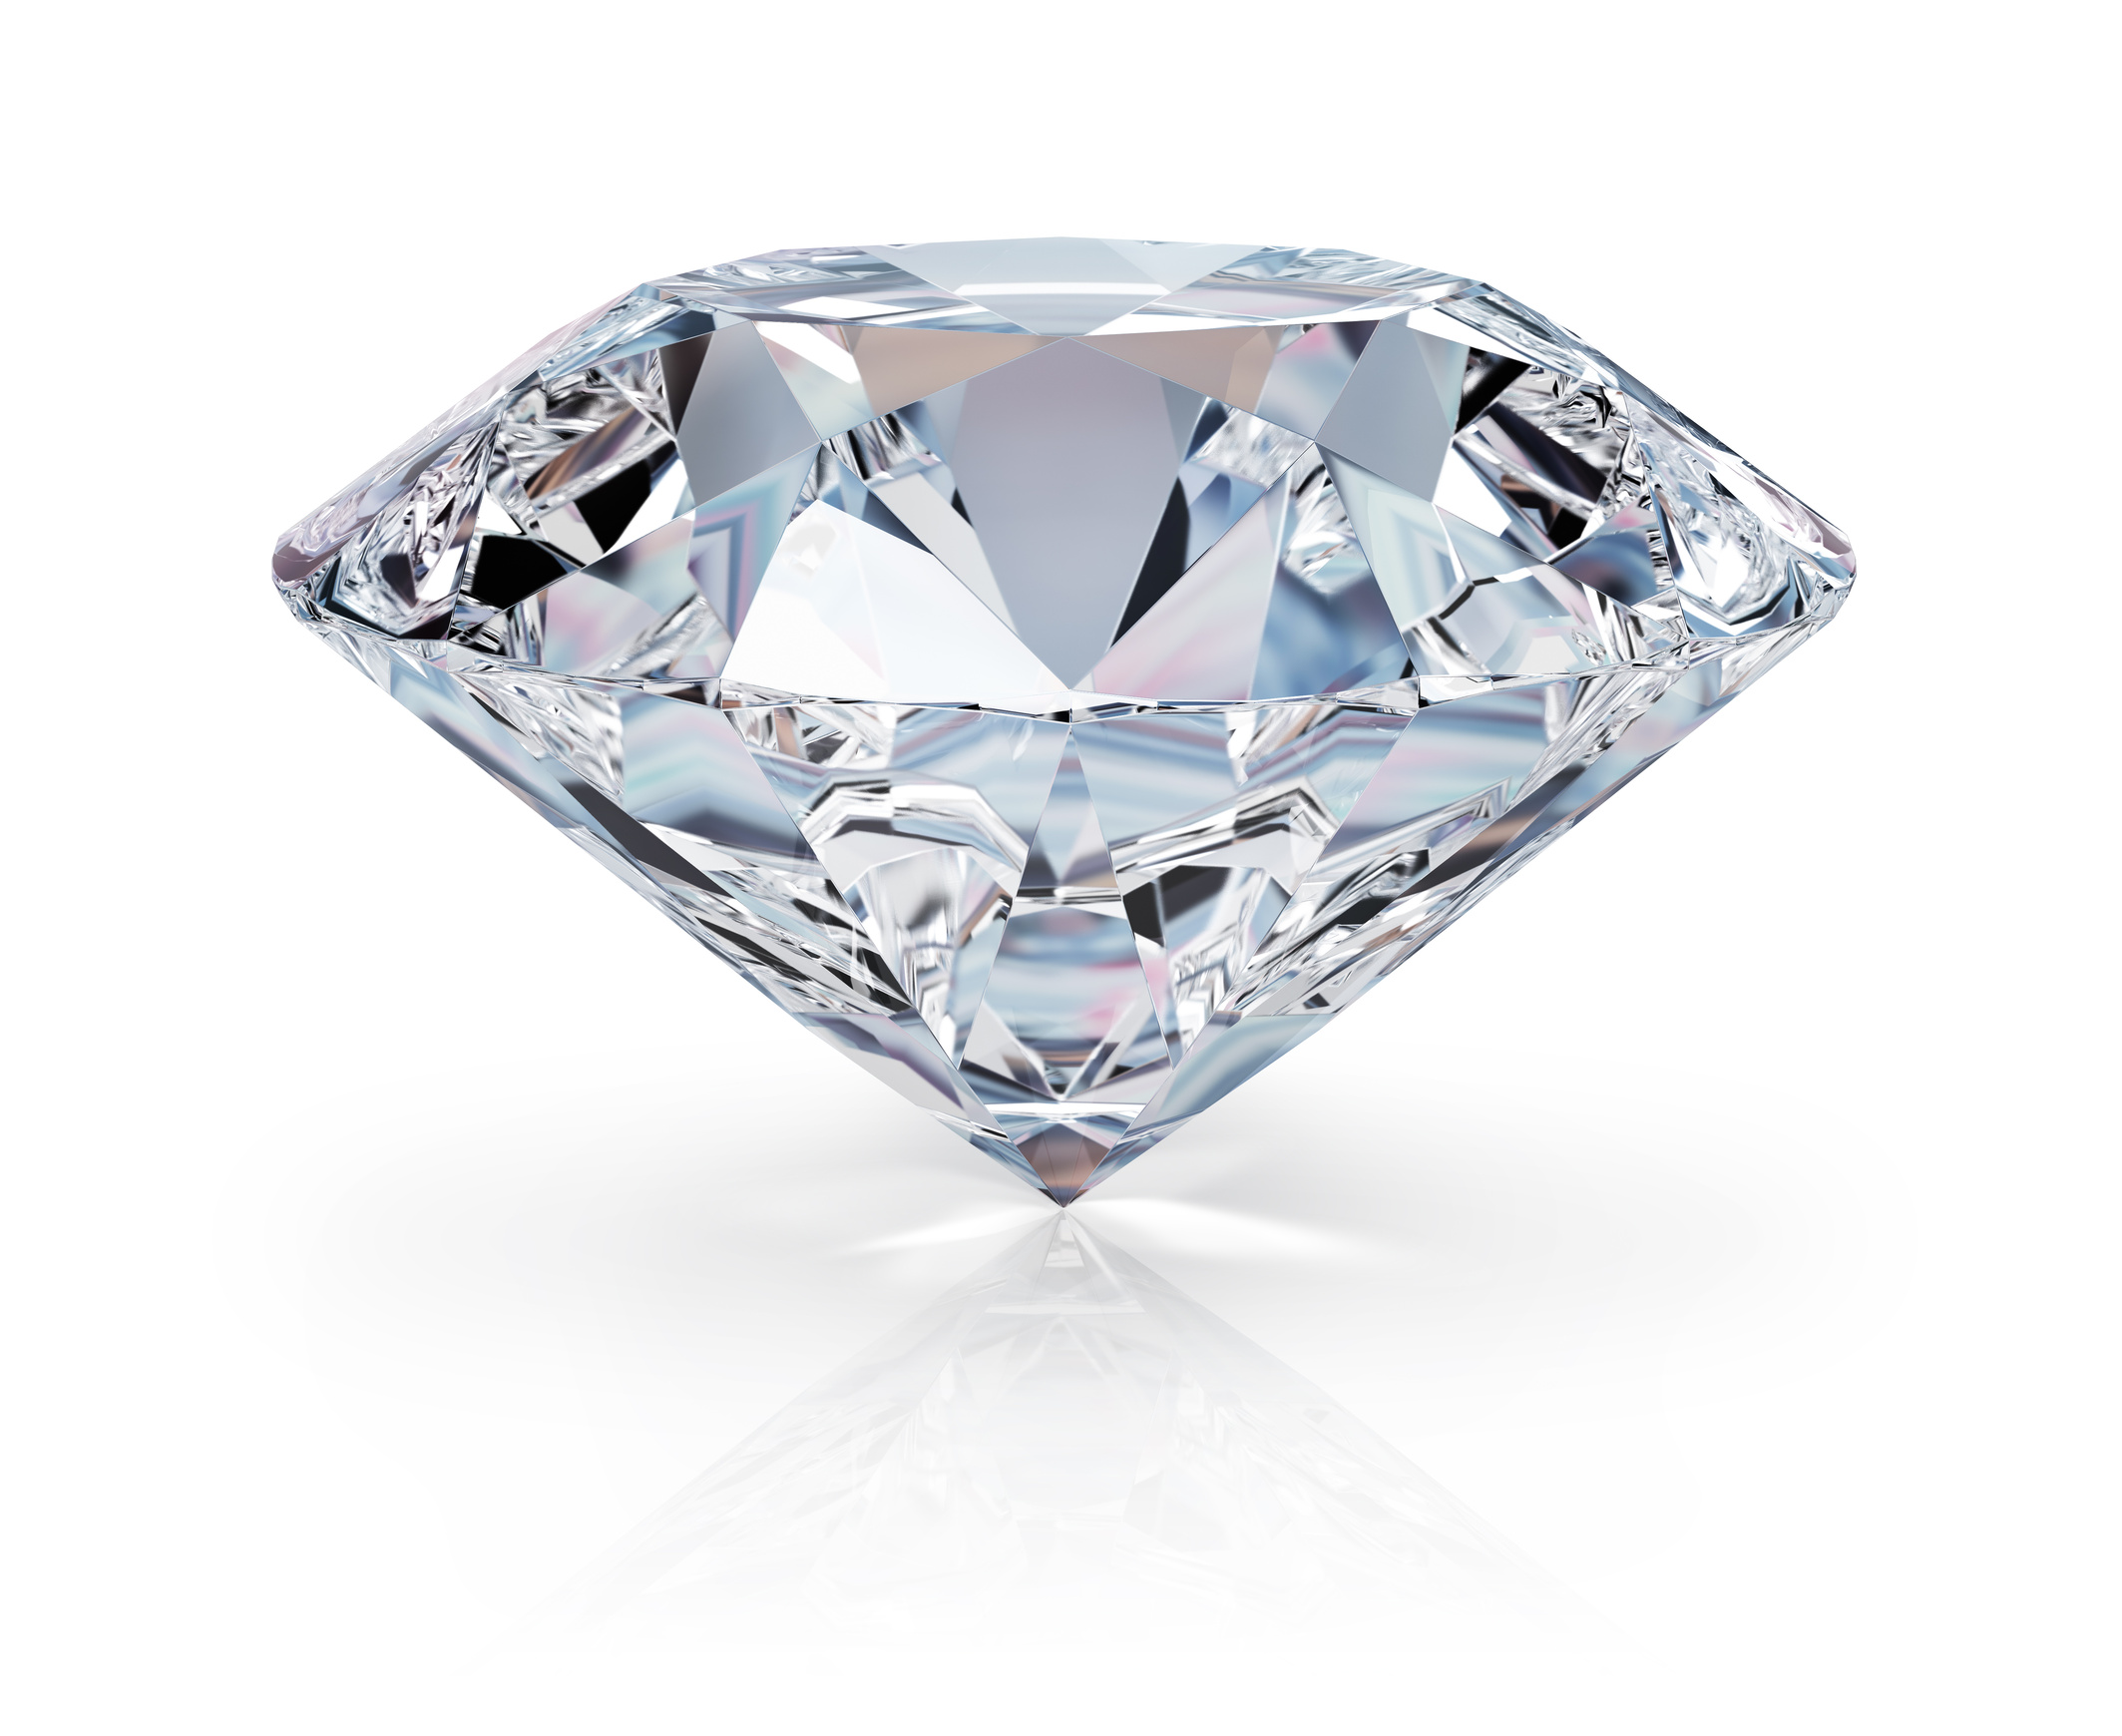 Diamond Transparent PNG by Ab